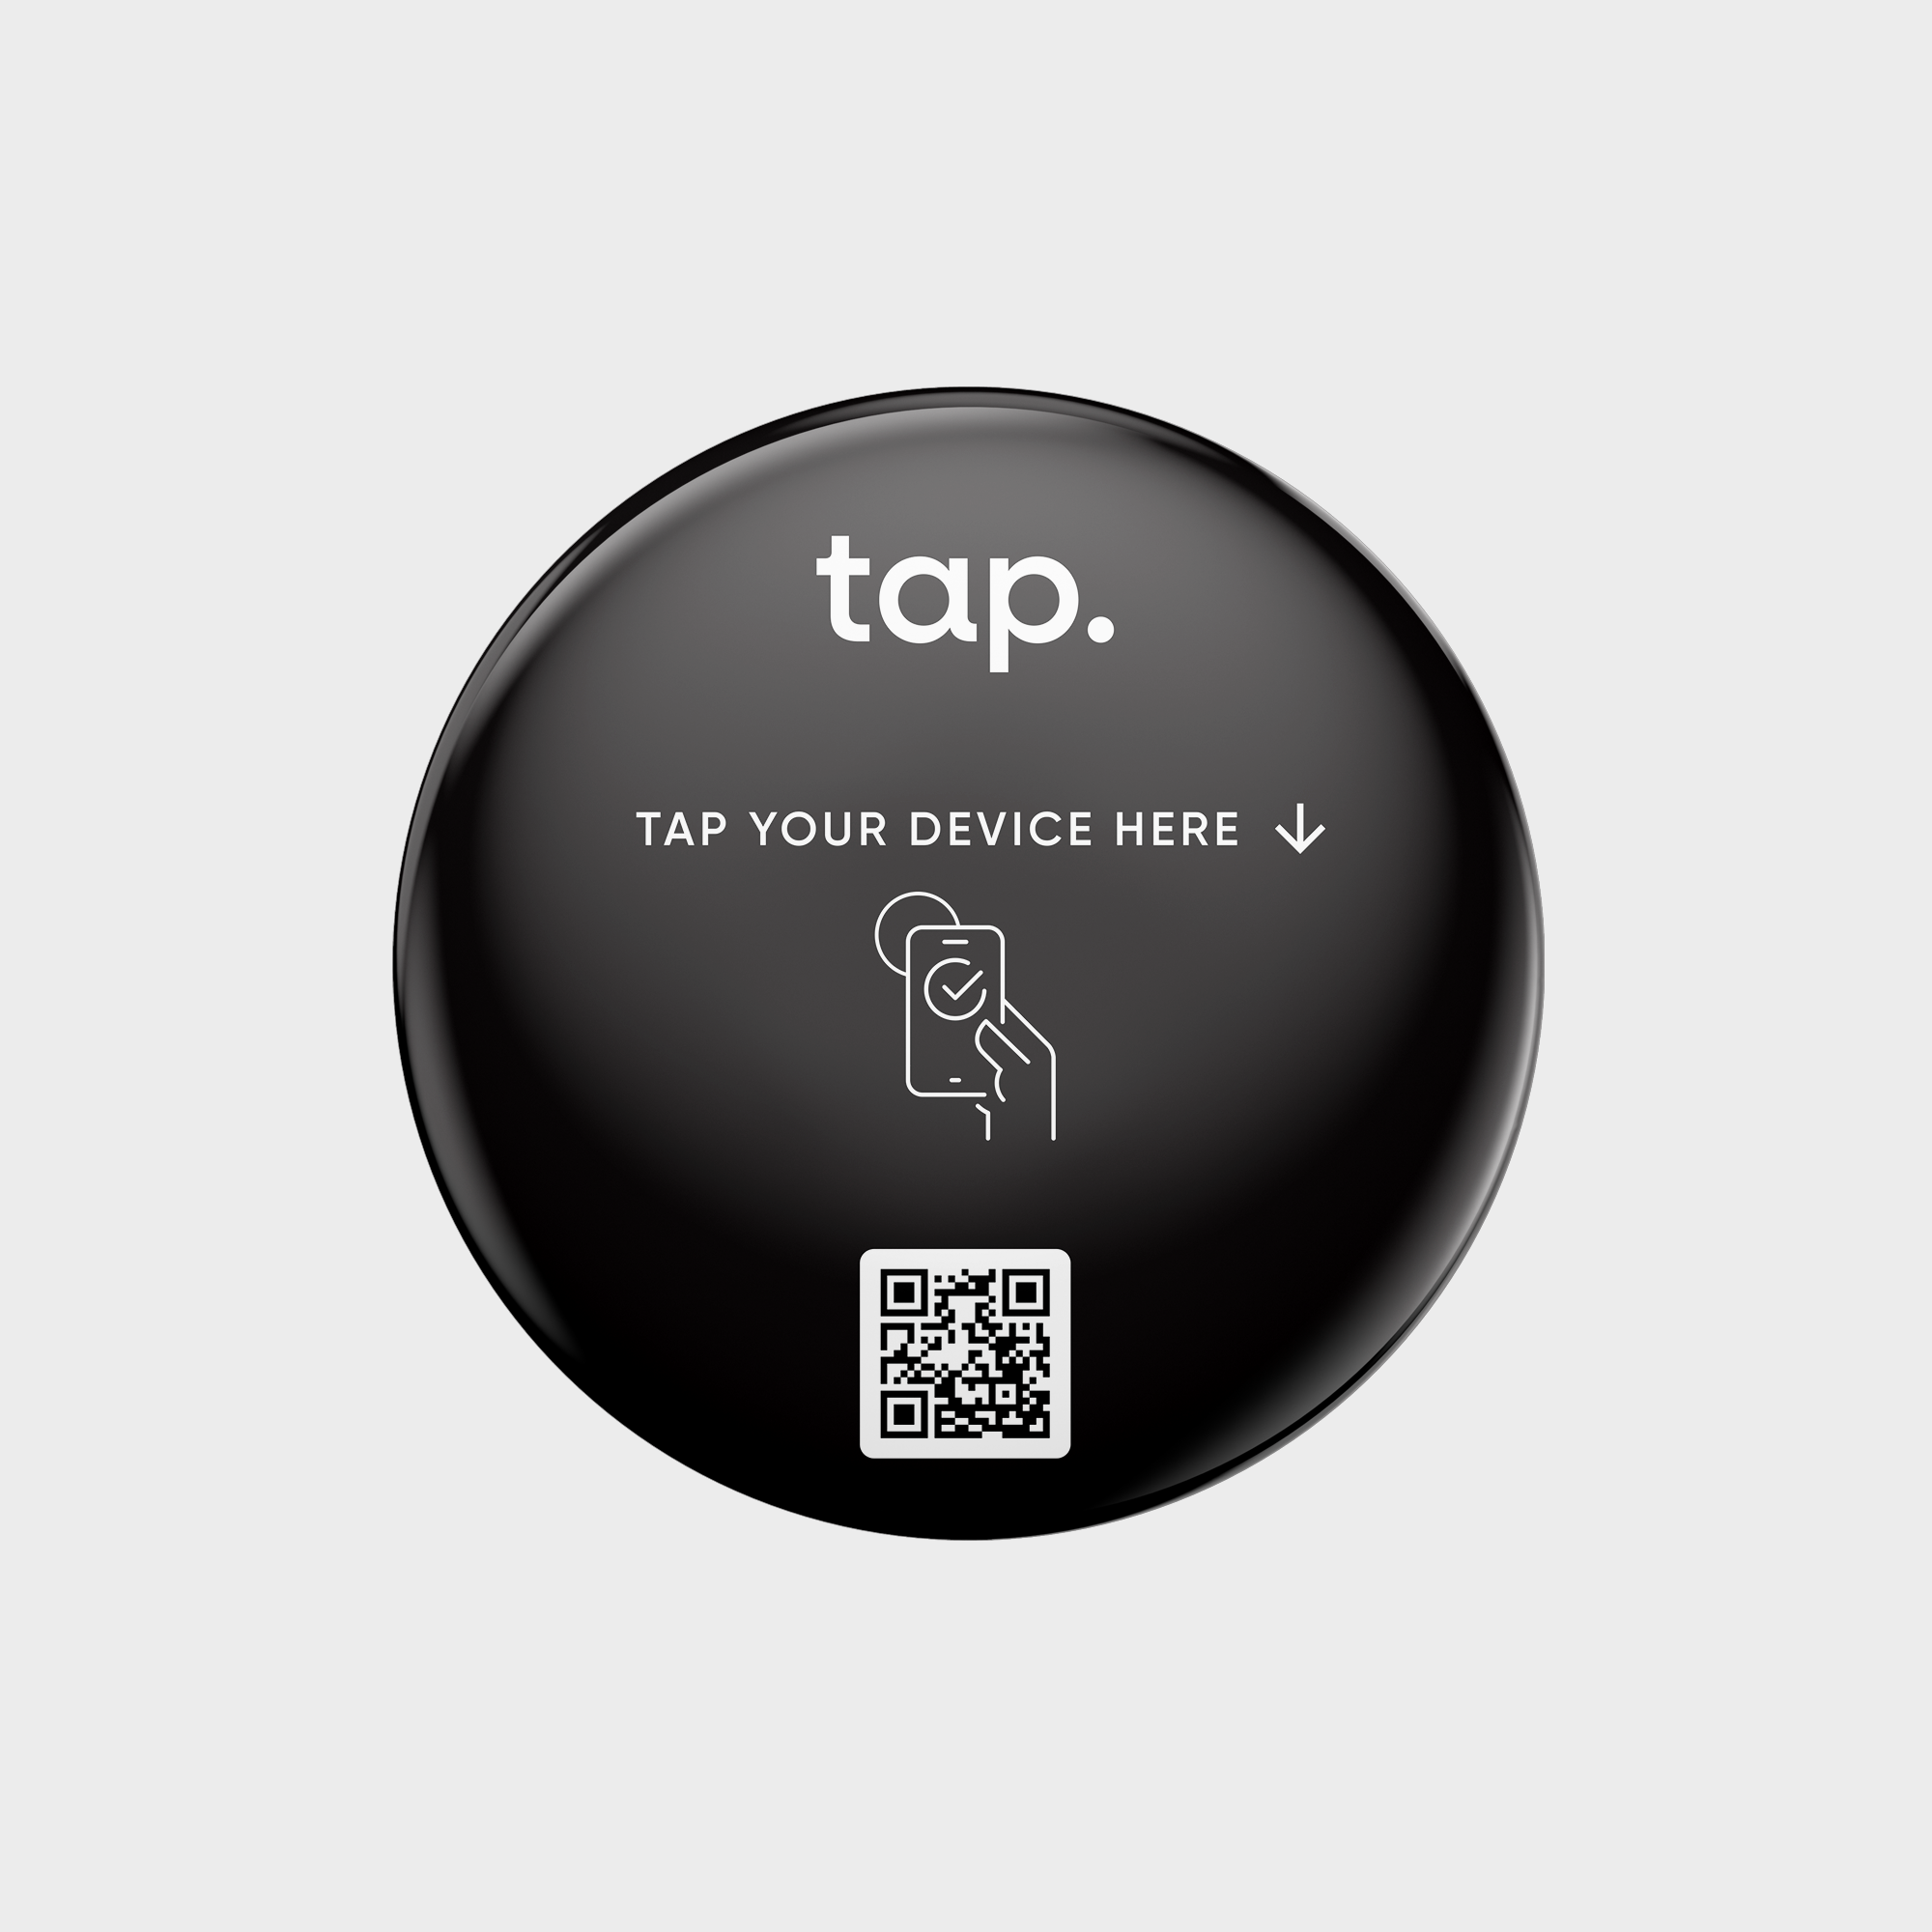 Black tap. sticker with NFC tag with QR code, device tapping icon, and text tap. TAP YOUR DEVICE HERE".